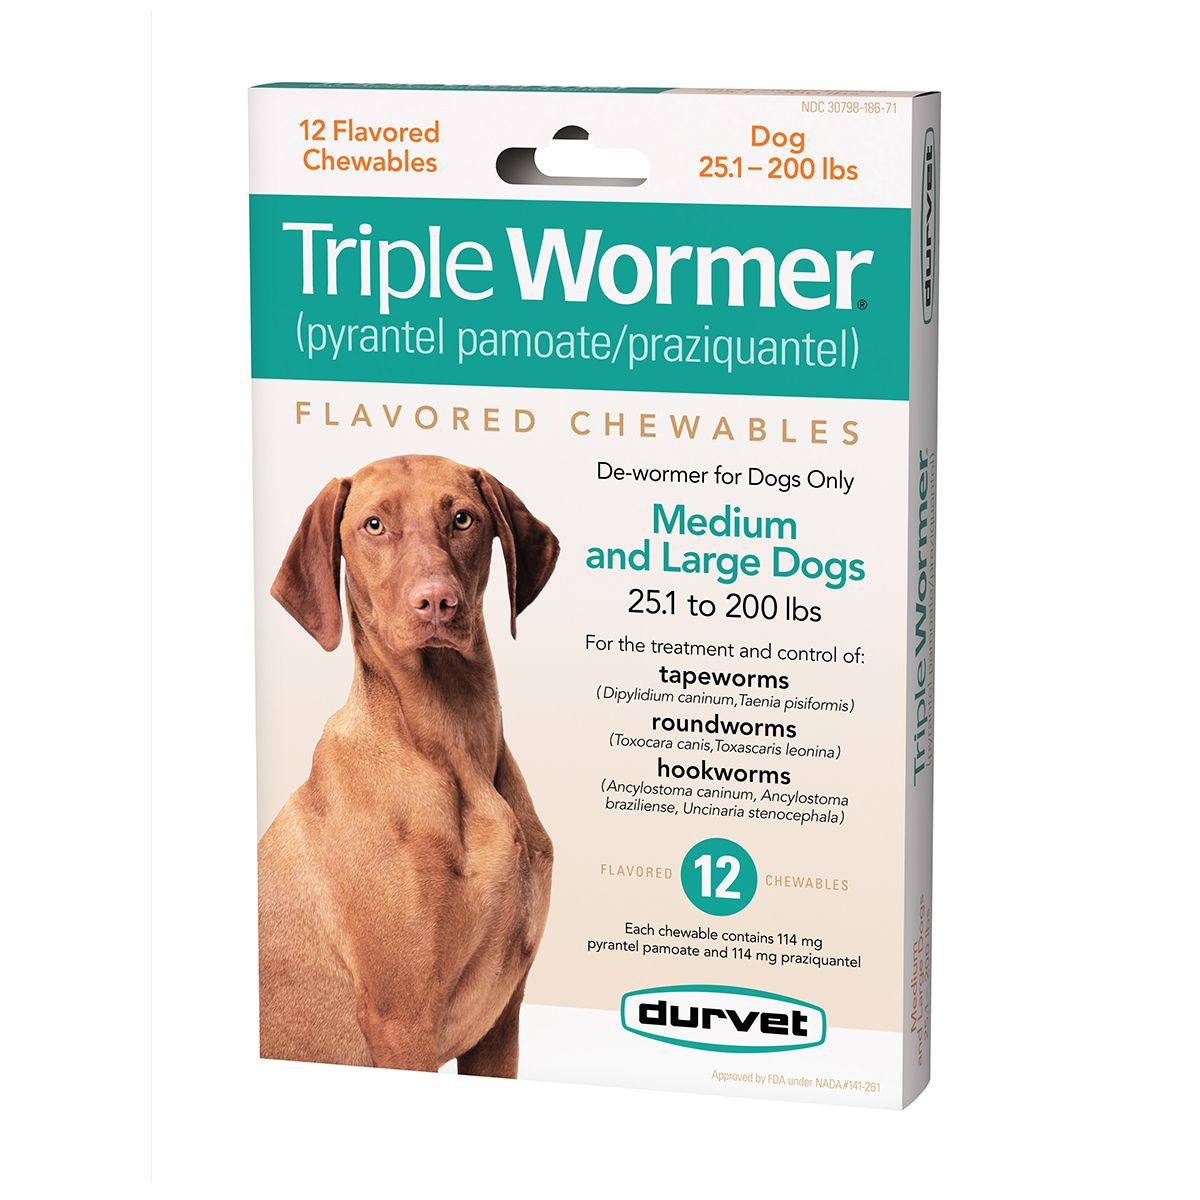 Triple Wormer Dewormer for Dogs